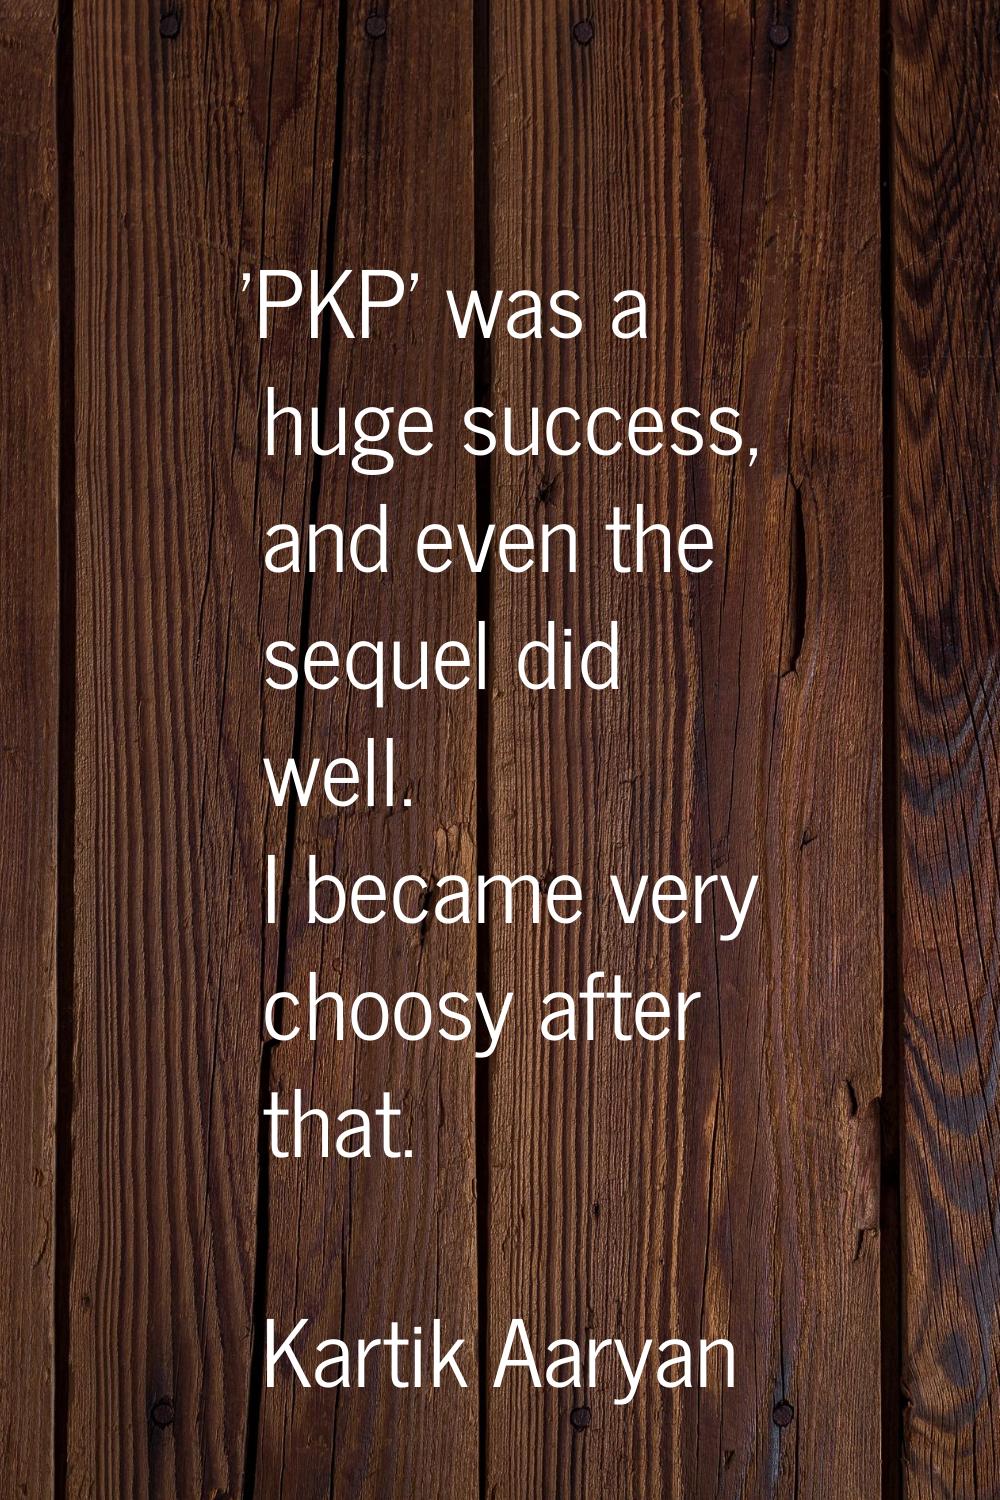 'PKP' was a huge success, and even the sequel did well. I became very choosy after that.